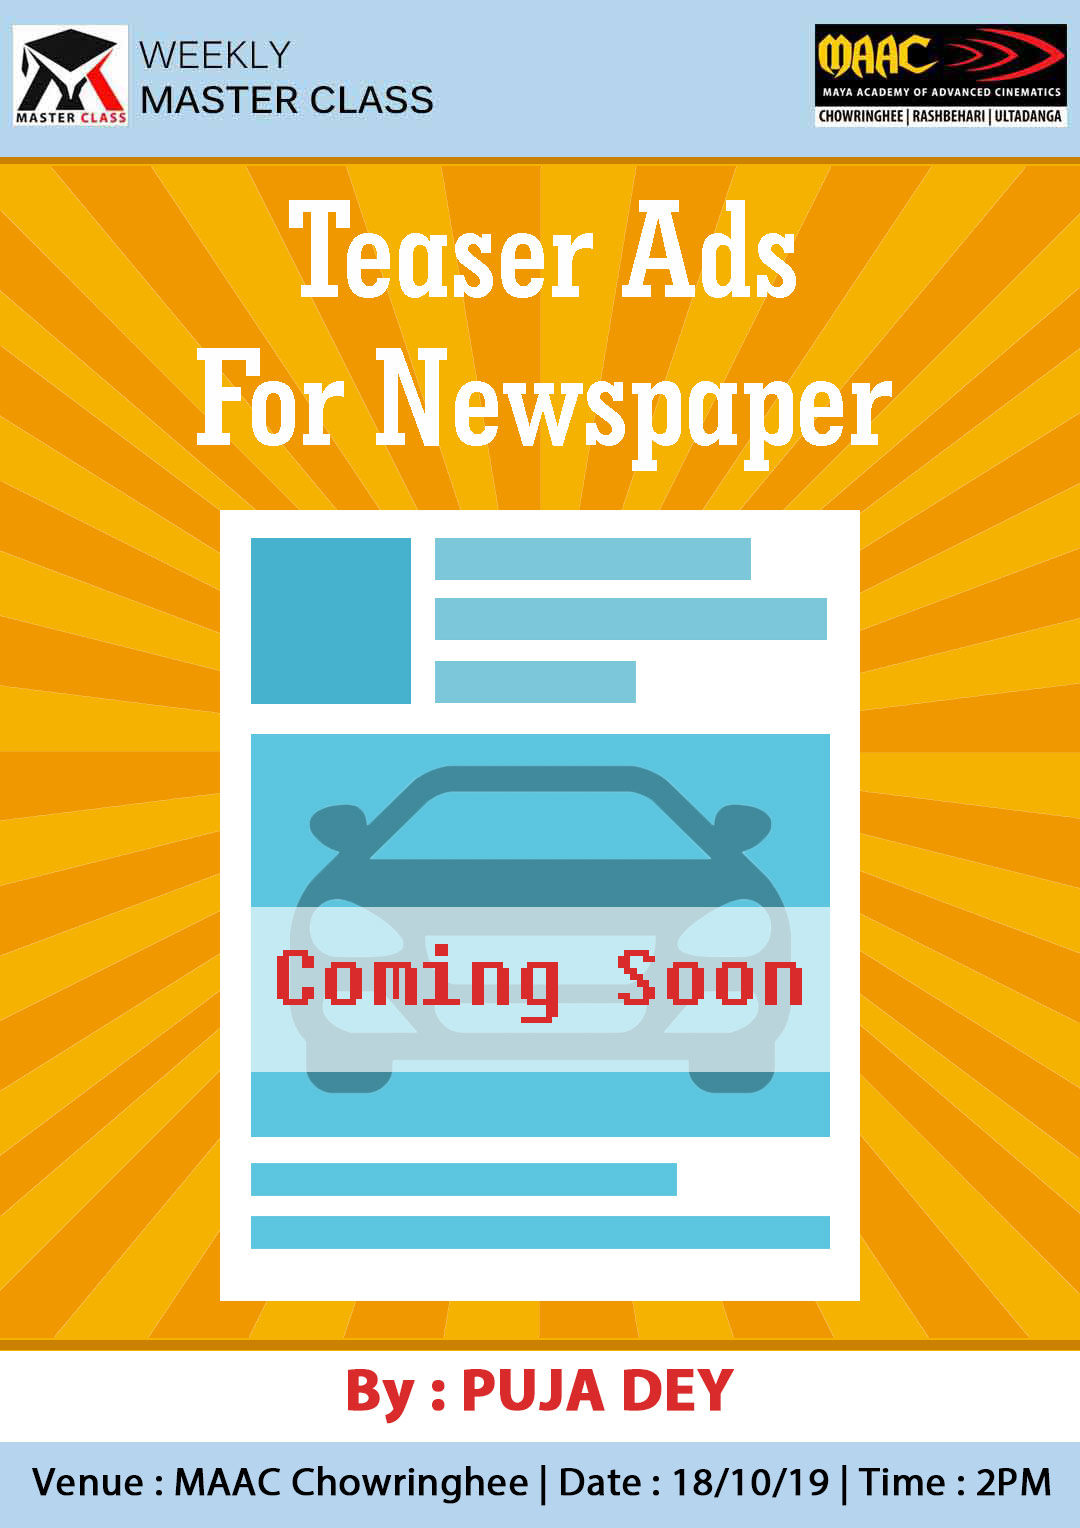 Weekly Master Class on Teaser Ads for Newspaper